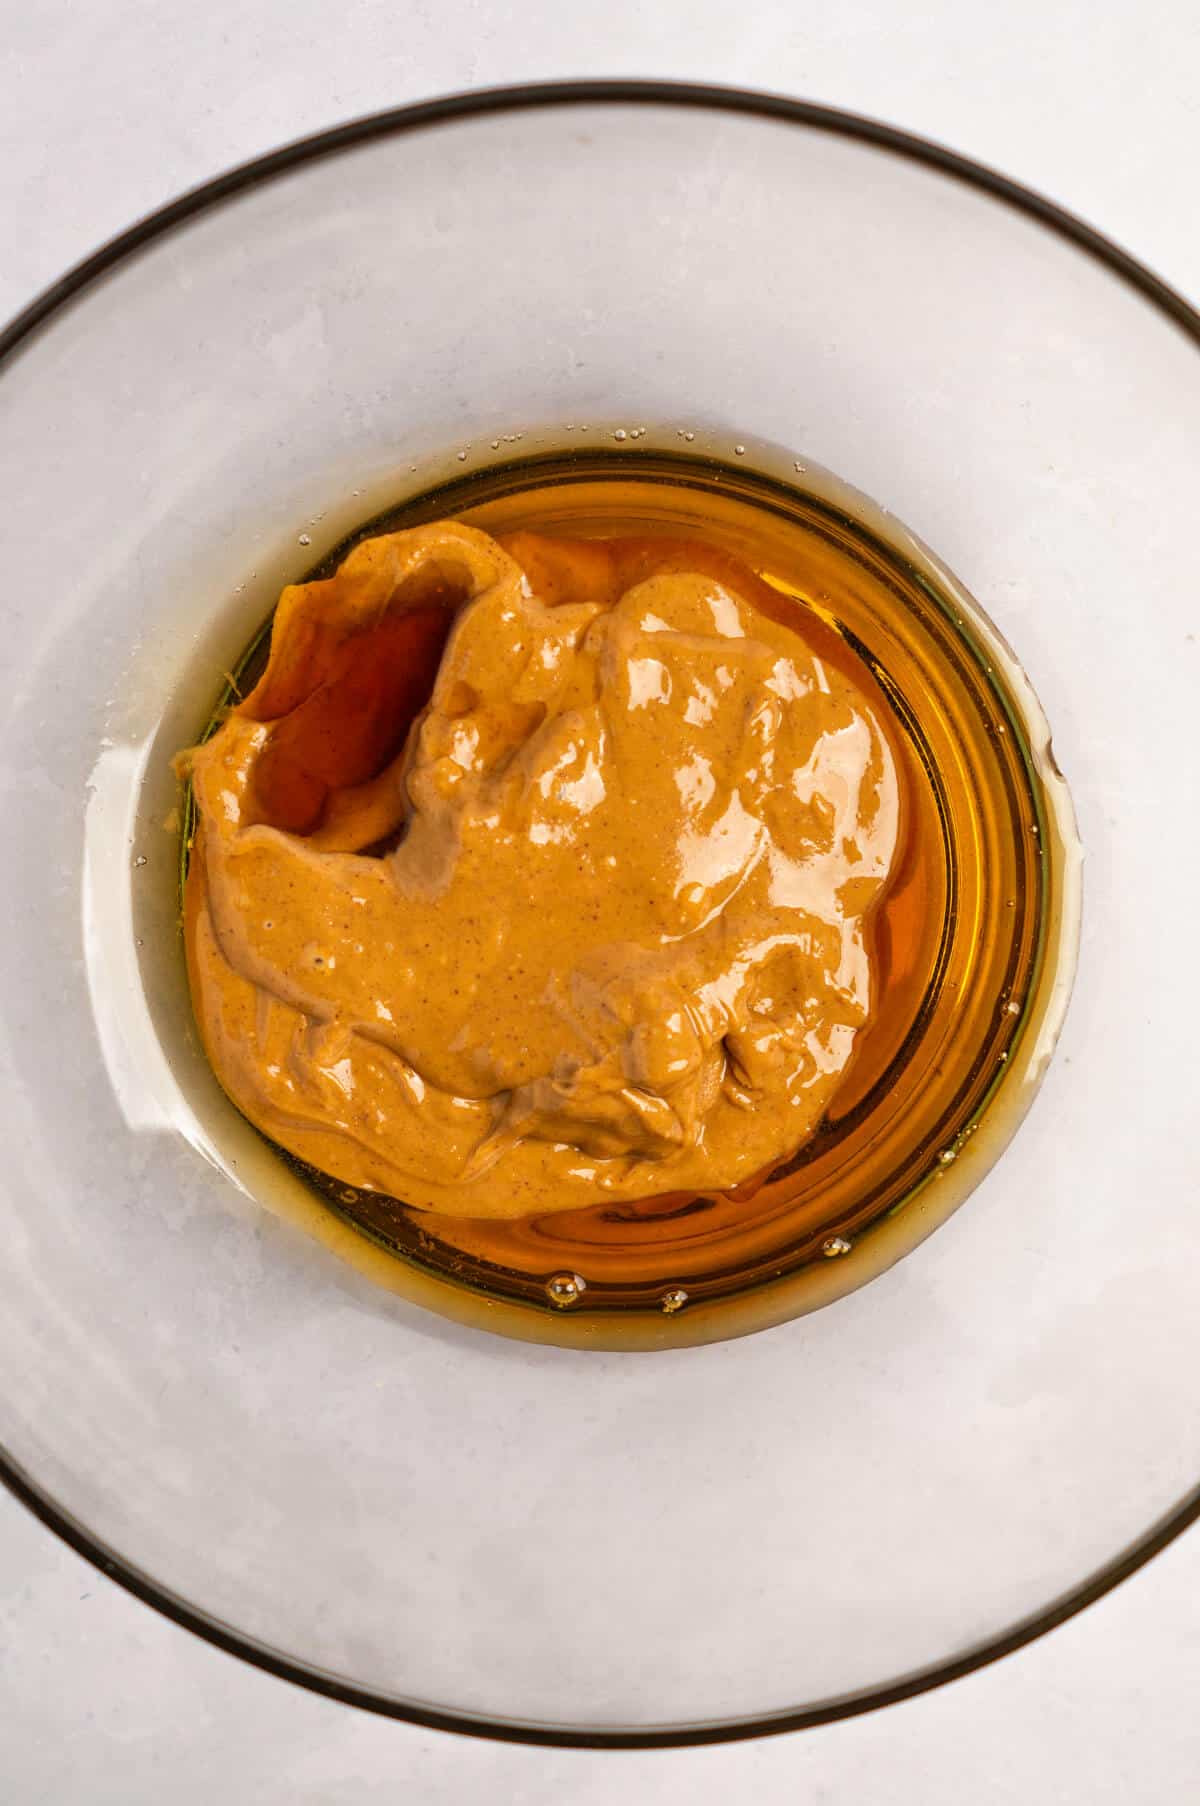 Bowl of maple syrup and peanut butter.